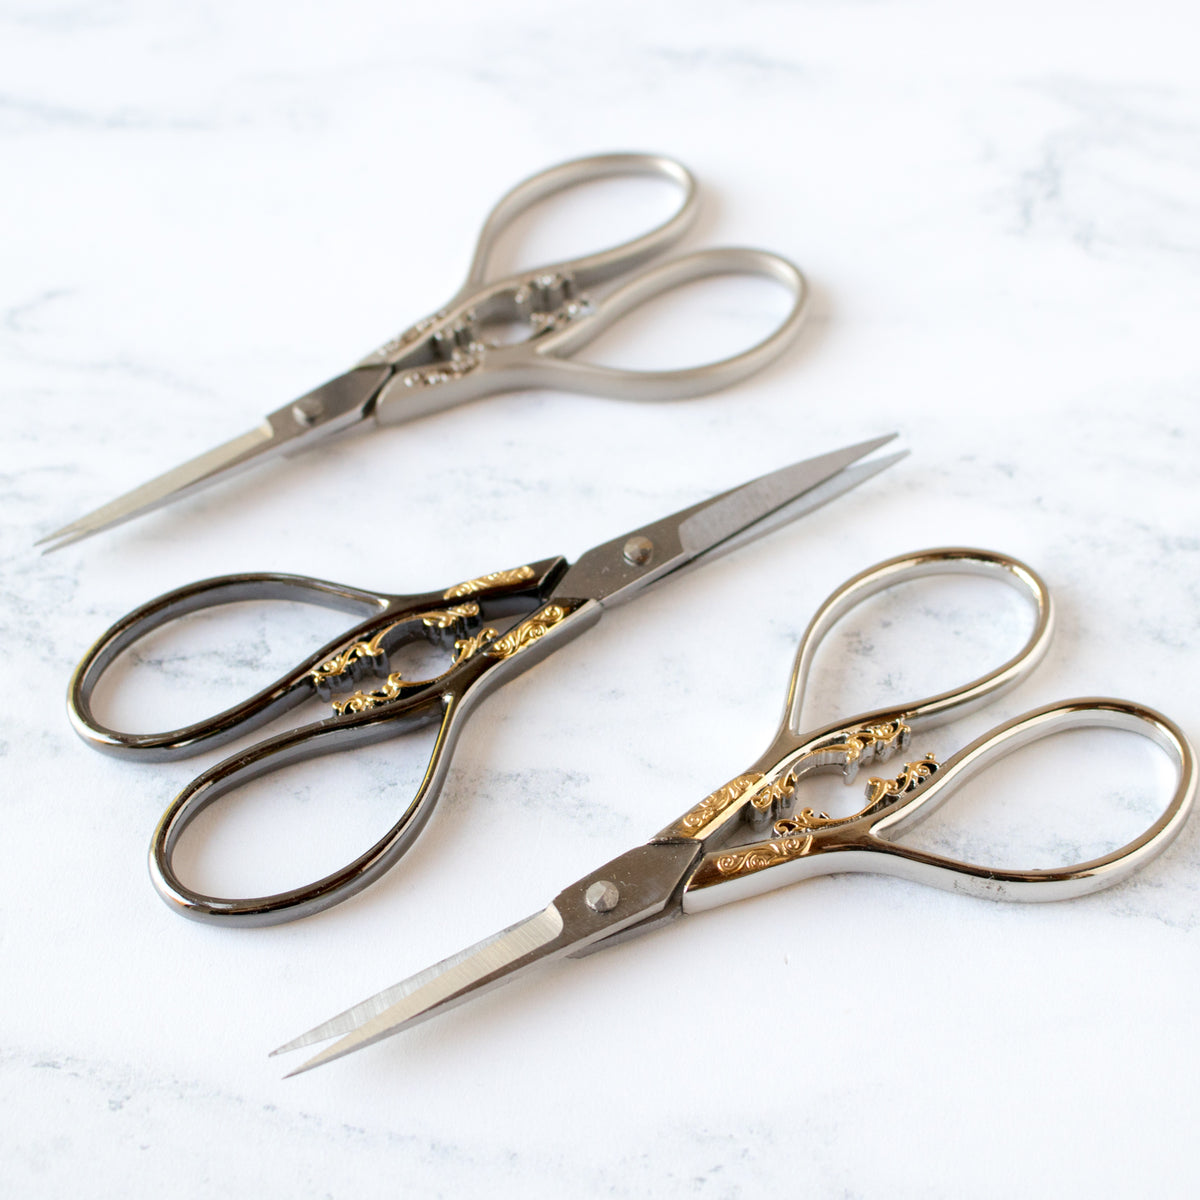 Marquis Embroidery Scissors with Filigree